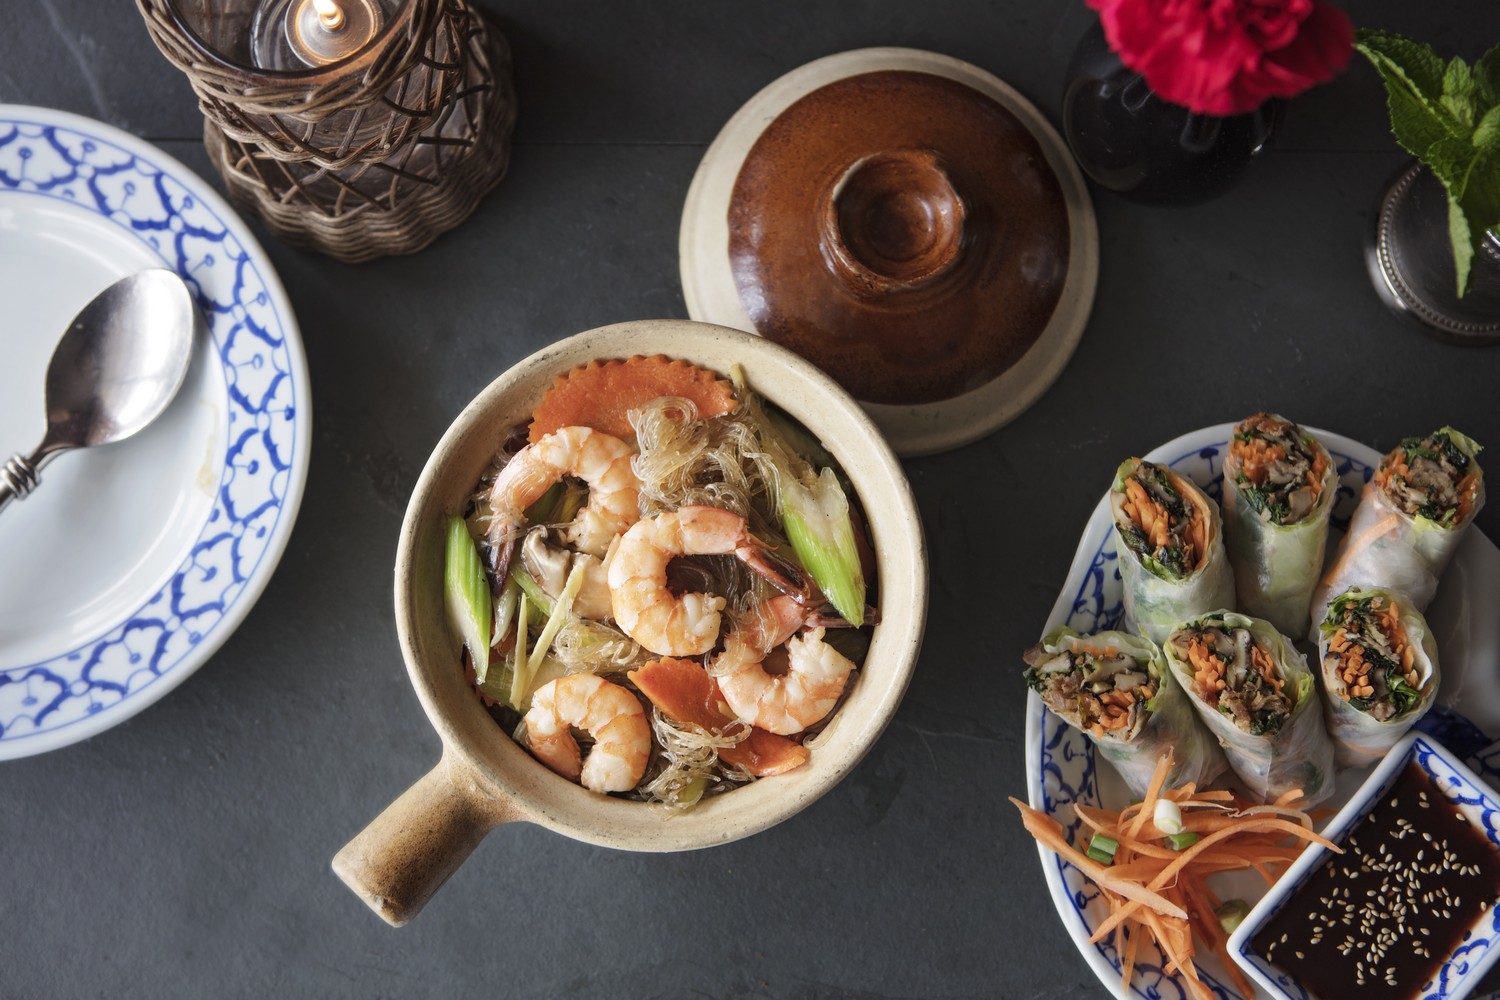 Shrimp-with-Glass-Noodles-Summer-Rolls-with-Roasted-Duck-resized